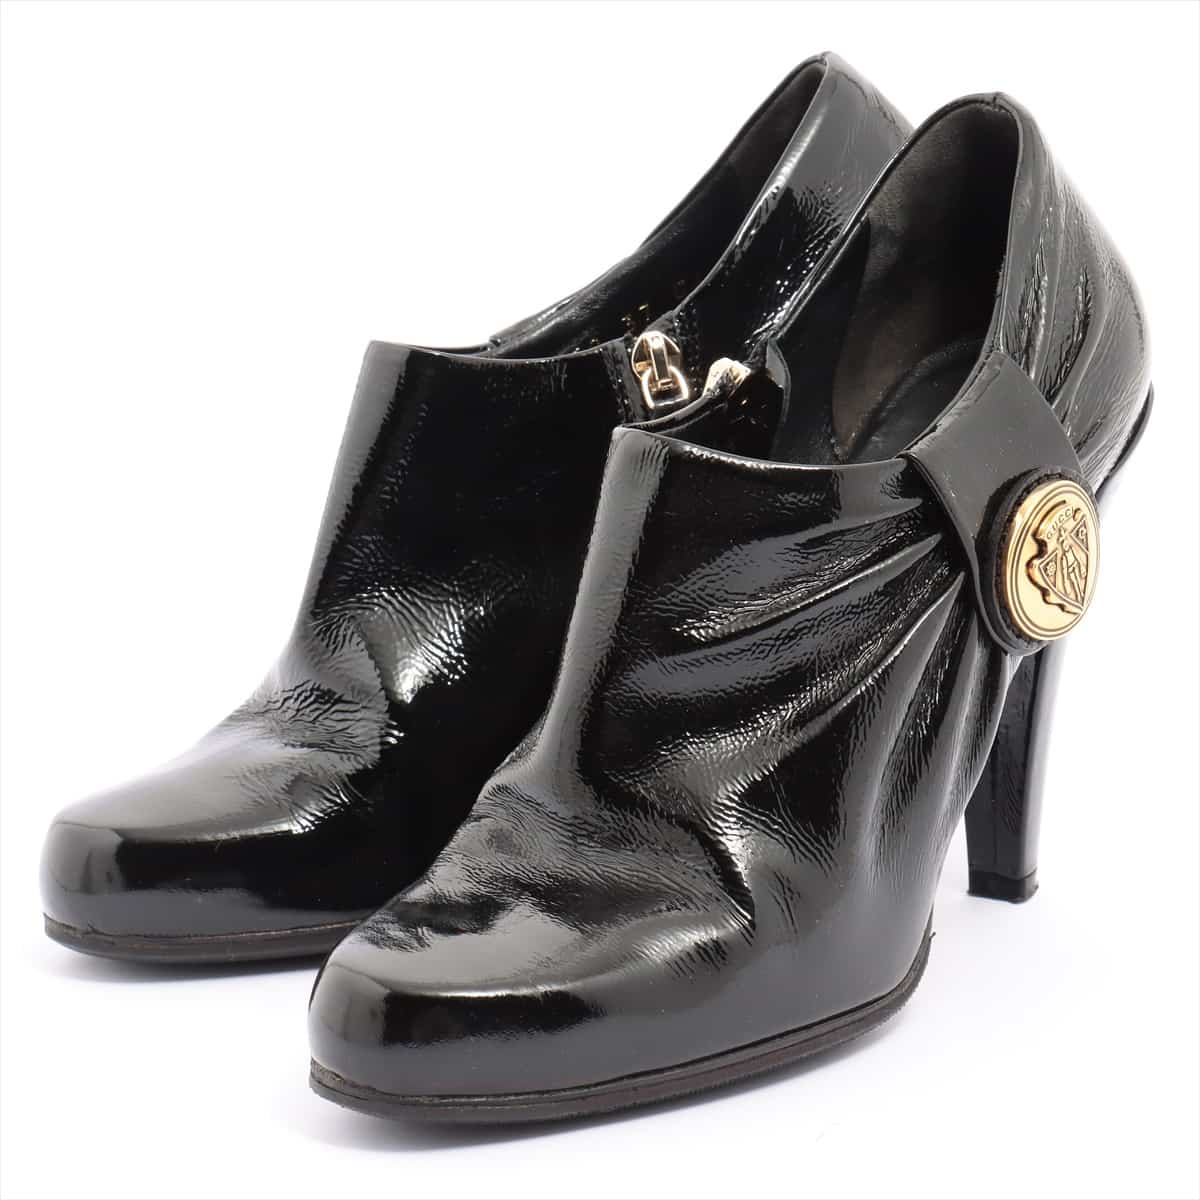 Gucci Patent leather Boots 37 Ladies' Black Has half rubber